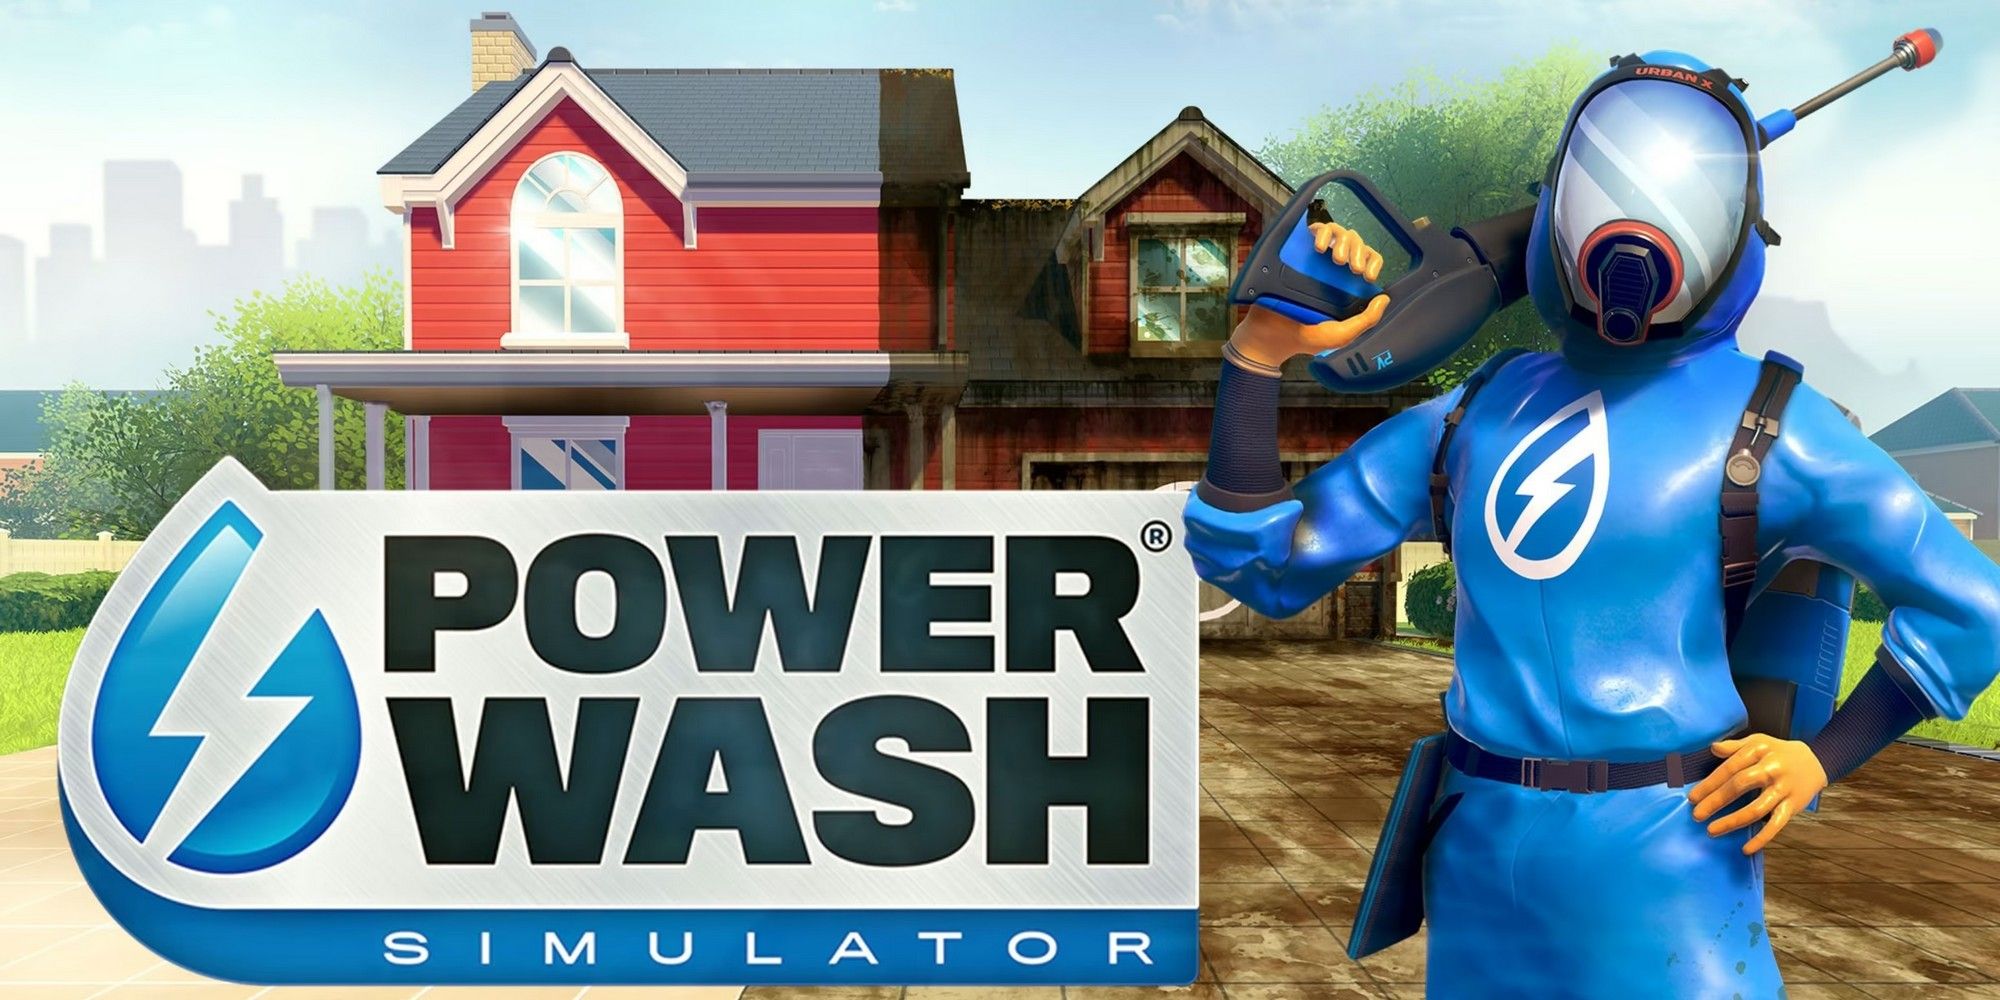 powerwash simulator promotional image with a house and dirty driveway